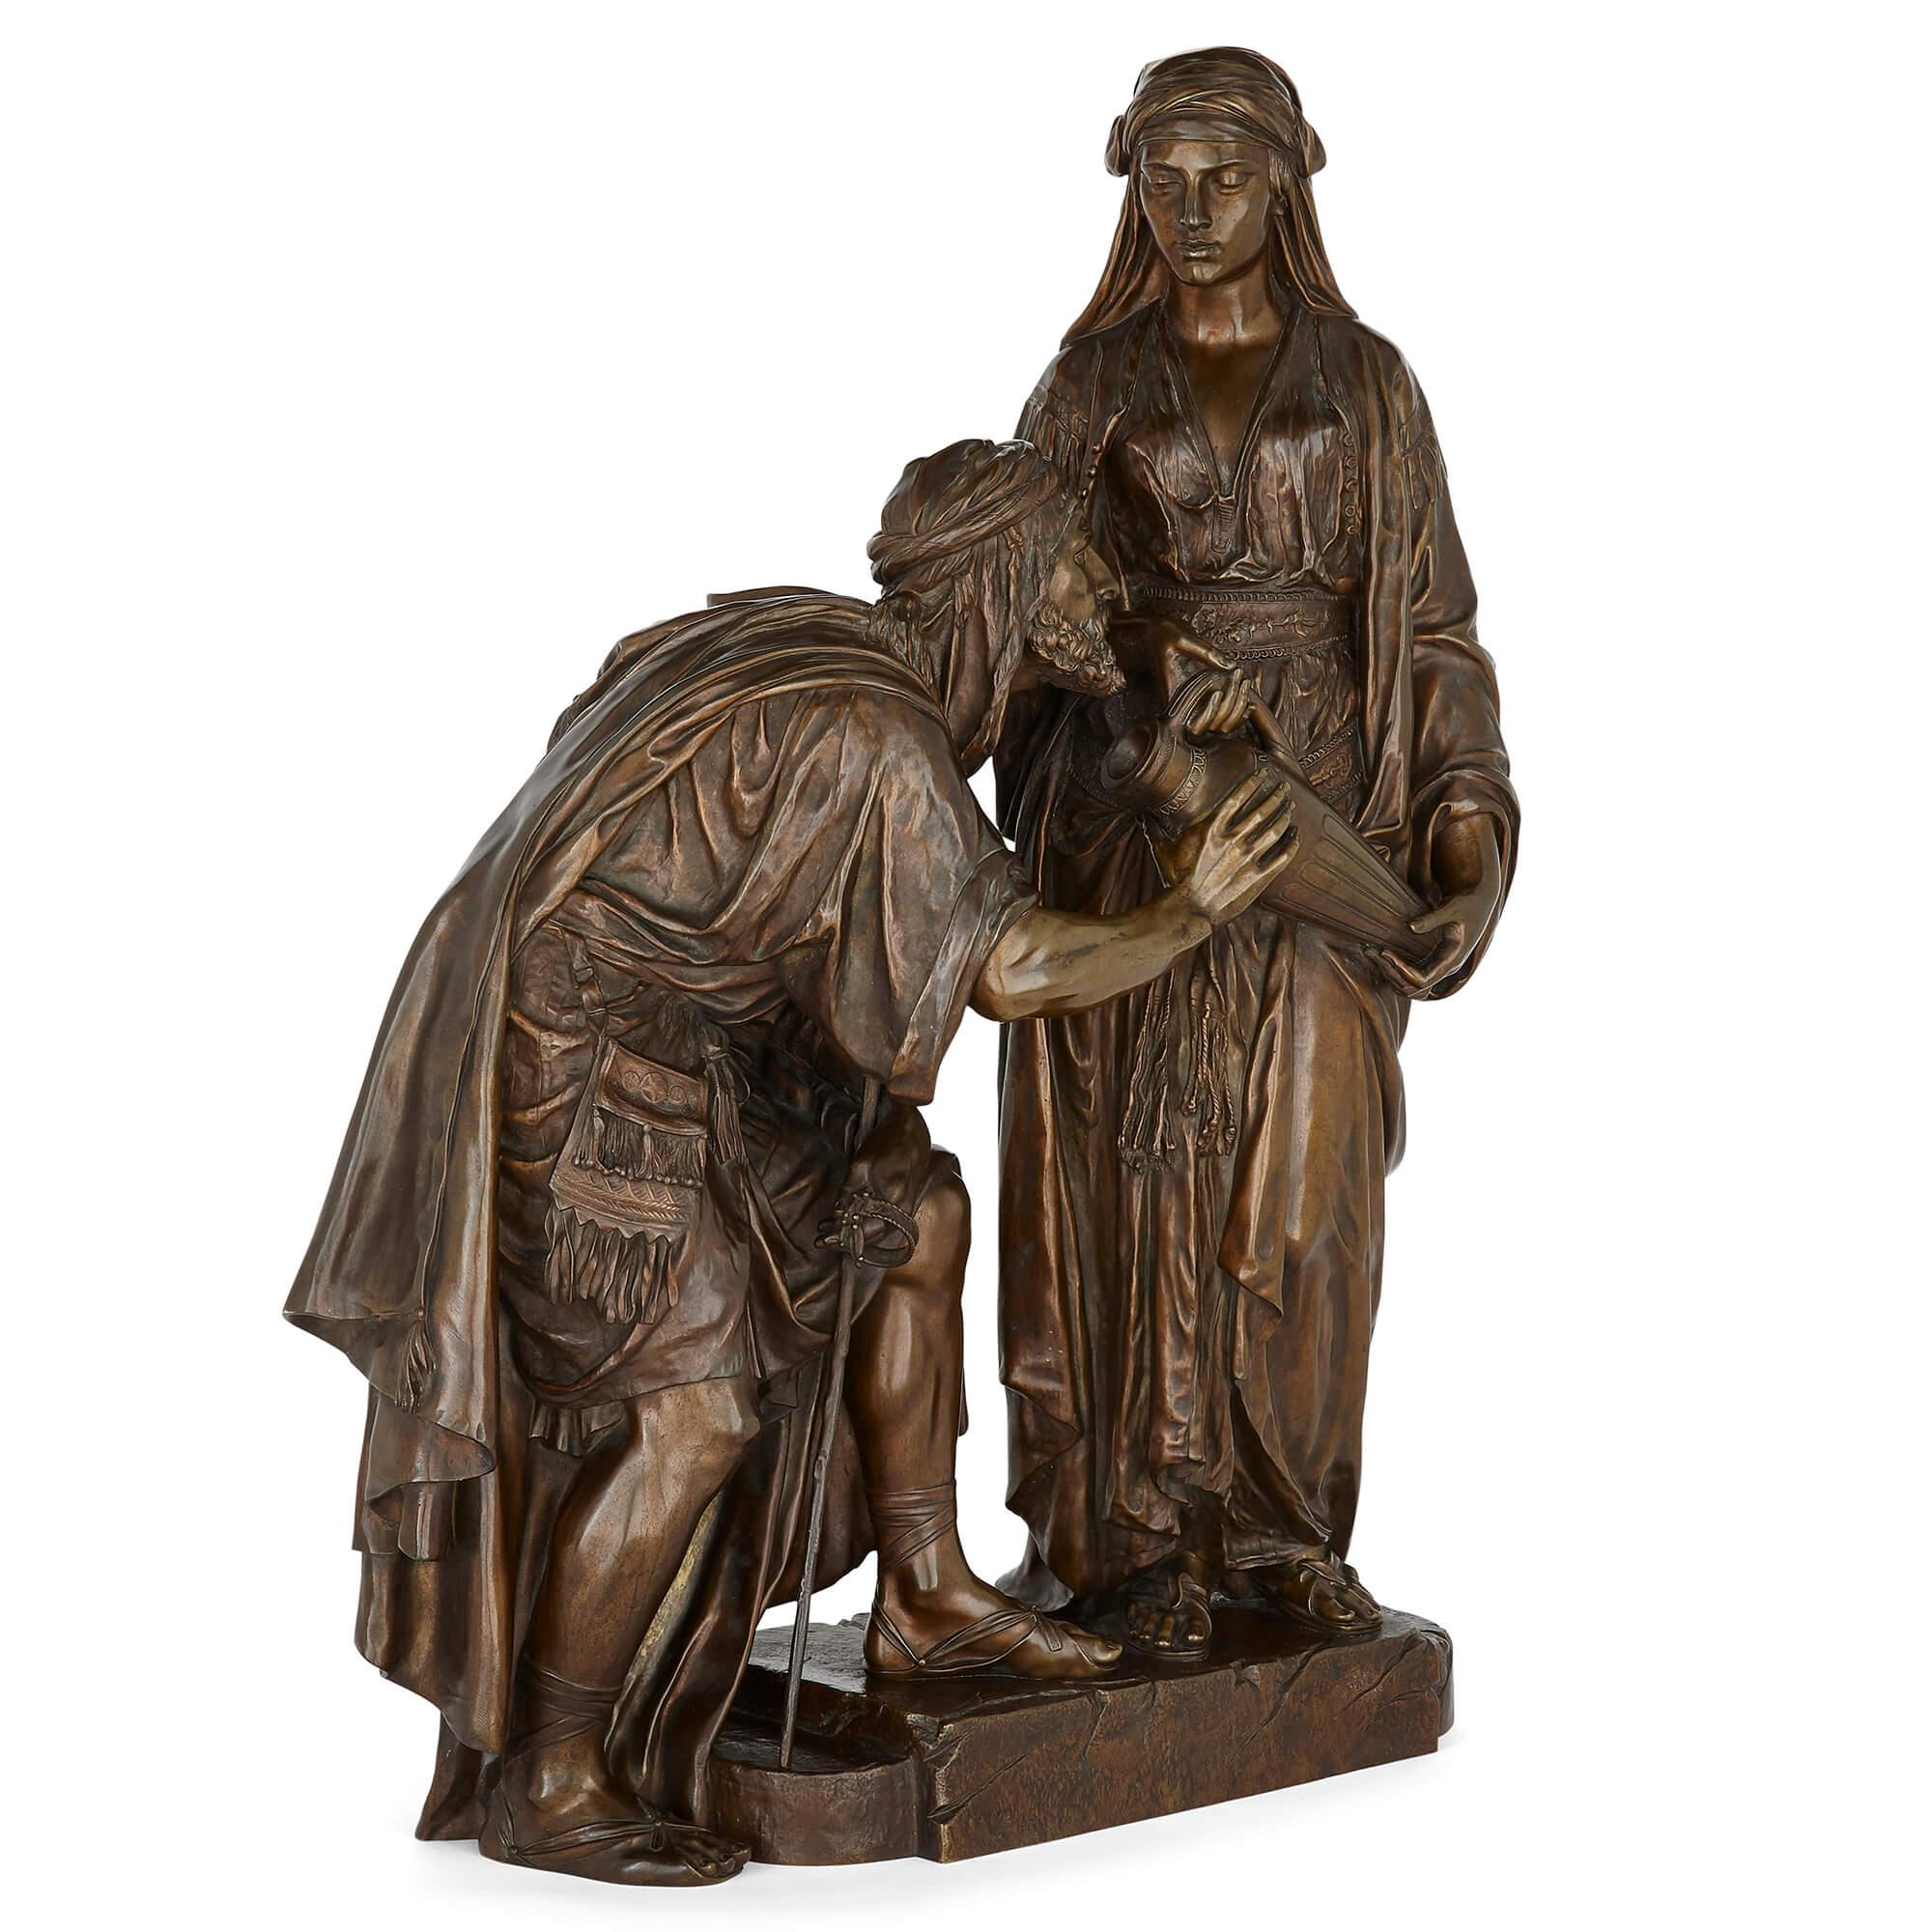 Orientalist bronze group of Biblical subject by Guillemin
French, late 19th Century
Height 80cm, width 60cm, depth 23cm

This impressive patinated bronze sculpture is by the celebrated Orientalist sculptor Émile Coriolan Hippolyte Guillemin and